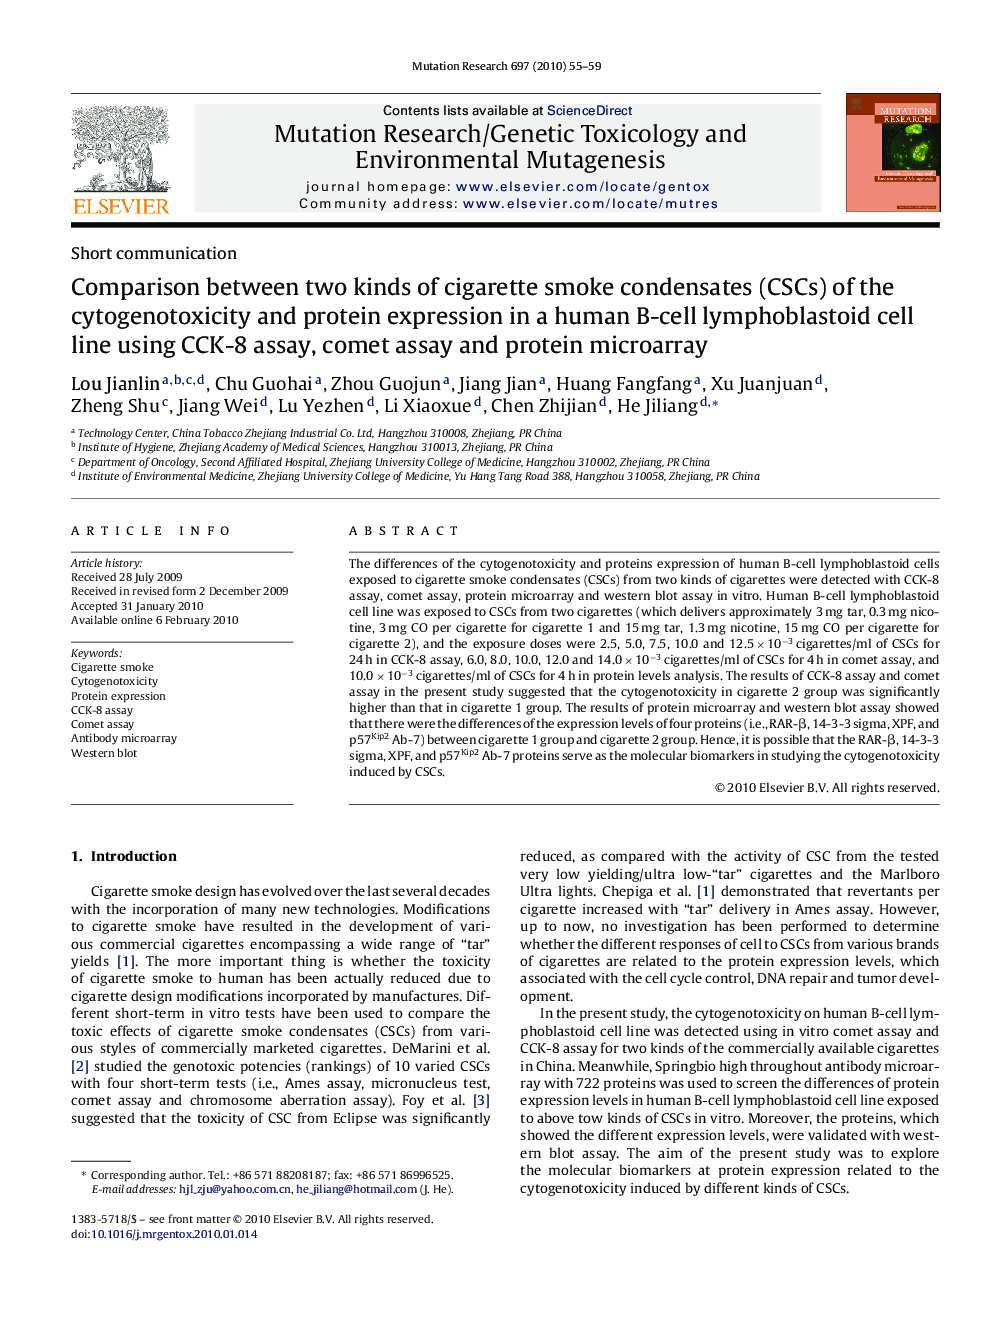 Comparison between two kinds of cigarette smoke condensates (CSCs) of the cytogenotoxicity and protein expression in a human B-cell lymphoblastoid cell line using CCK-8 assay, comet assay and protein microarray